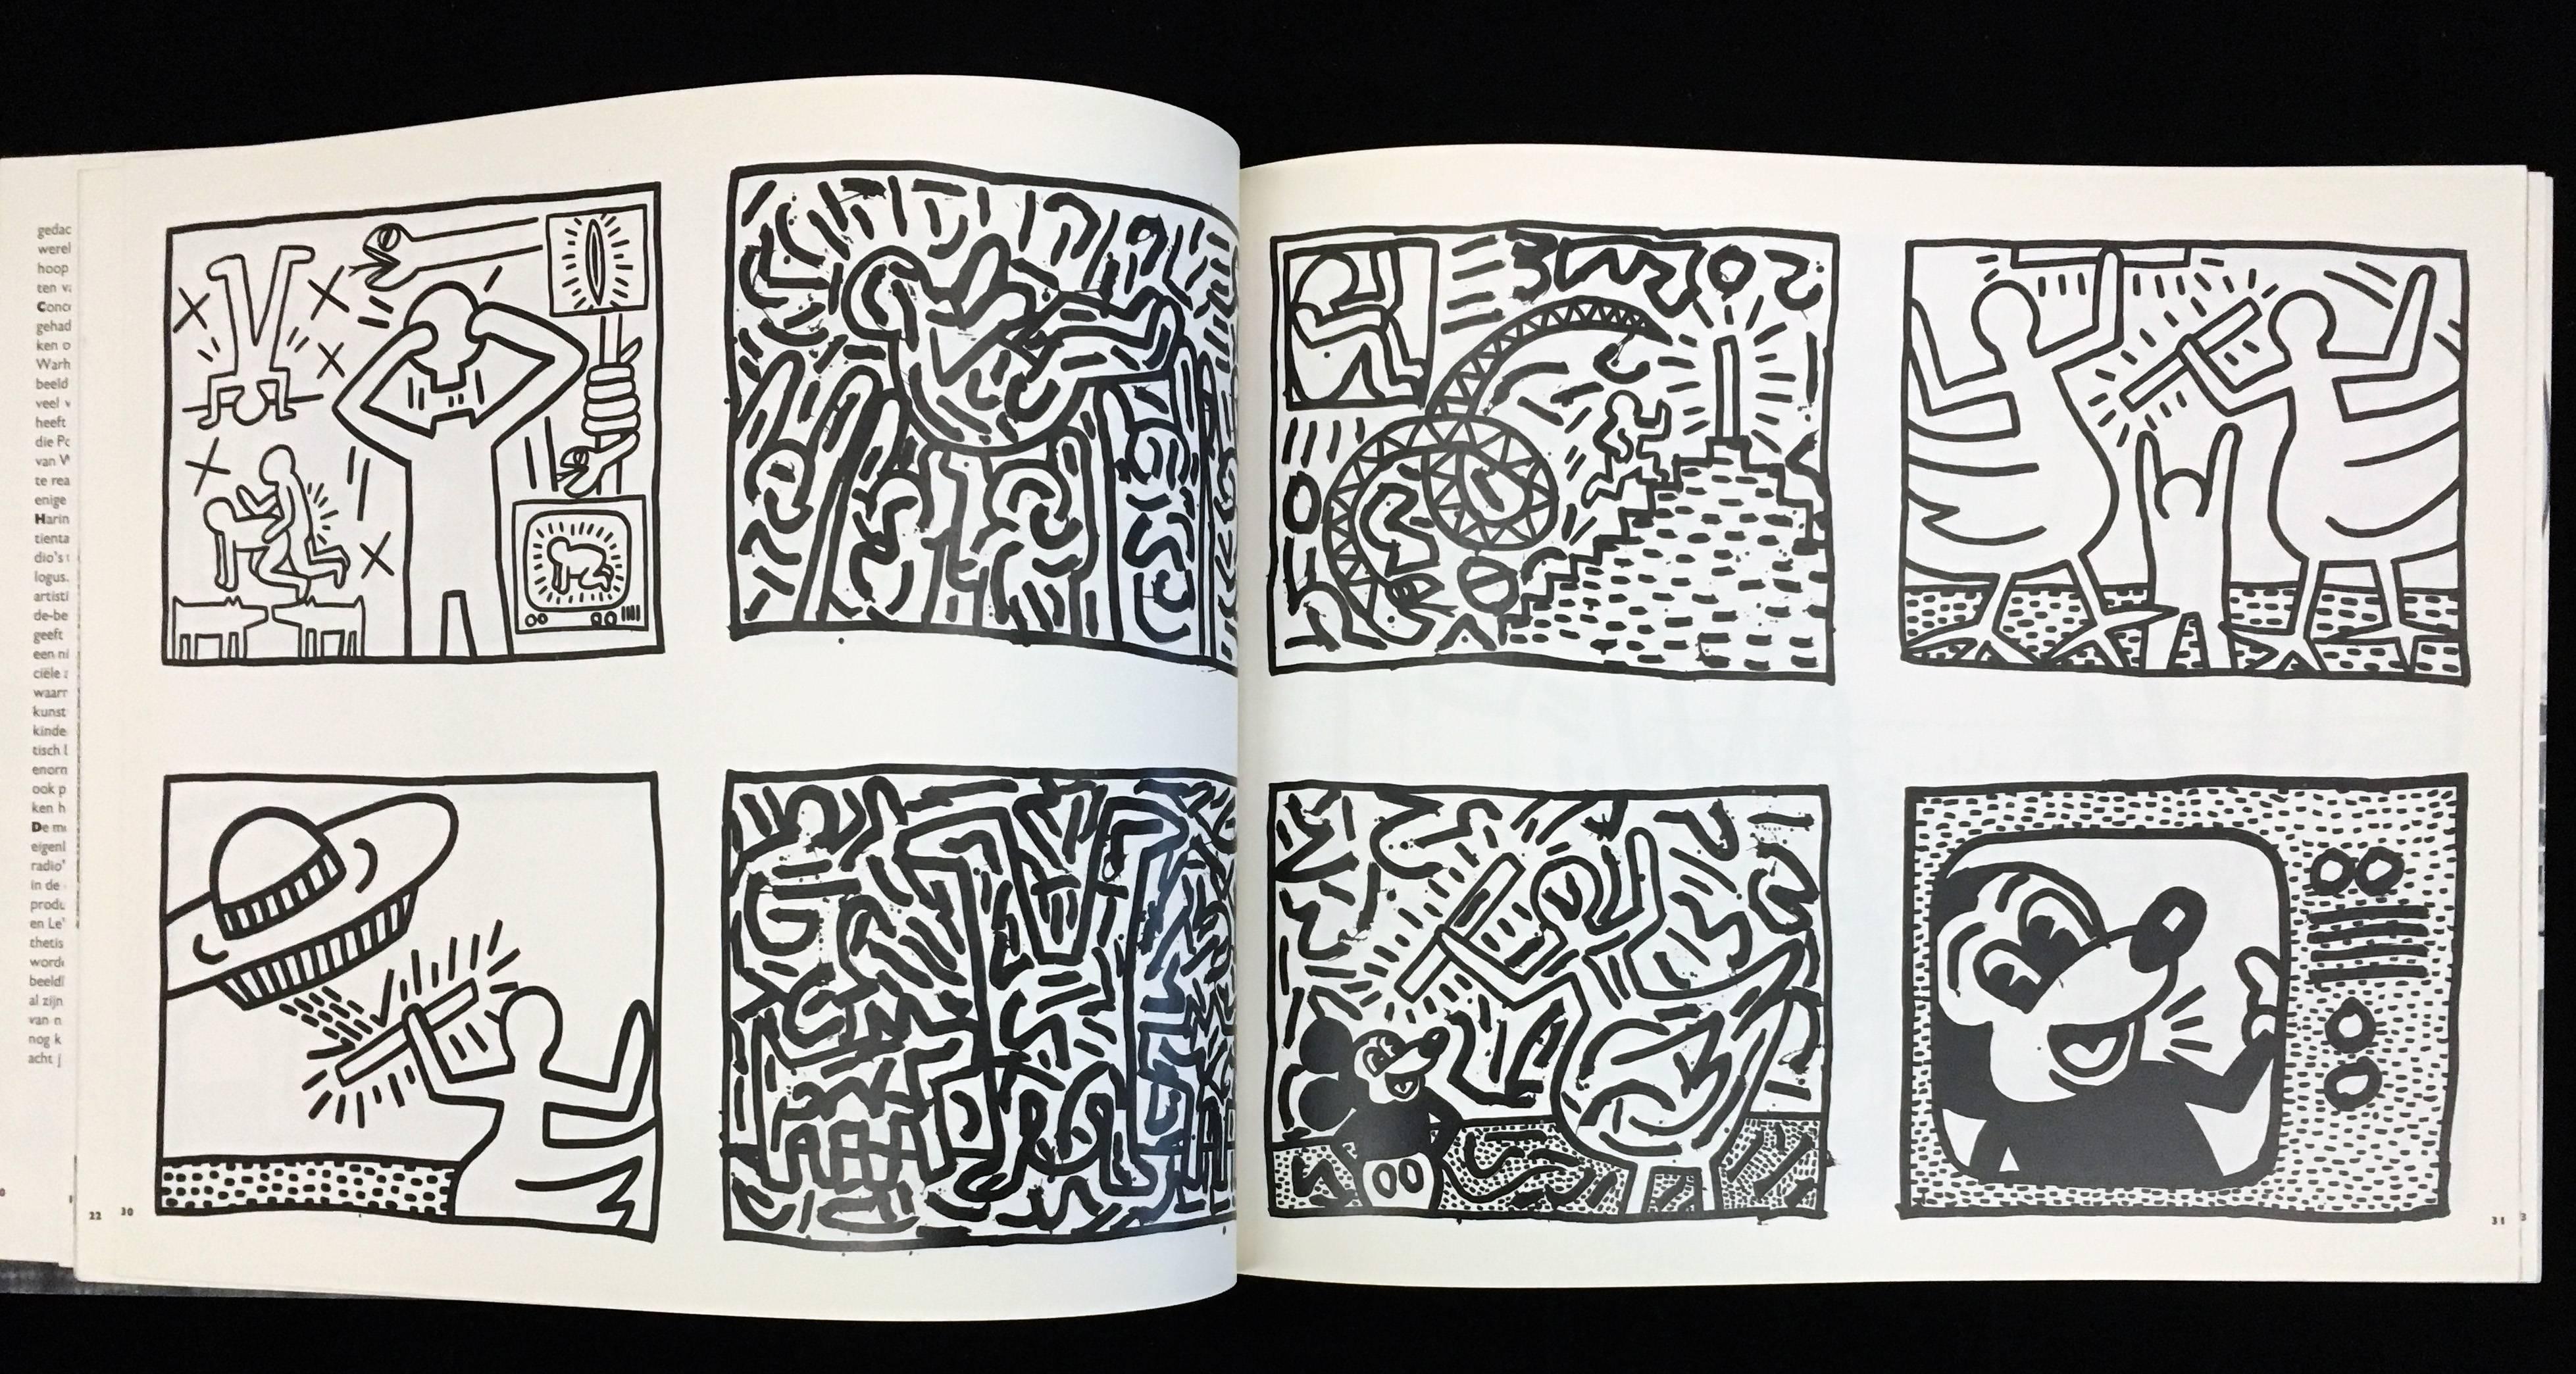 Keith Haring Stedelijk Museum 1986 (Keith Haring 1986 exhibition catalog) For Sale 5